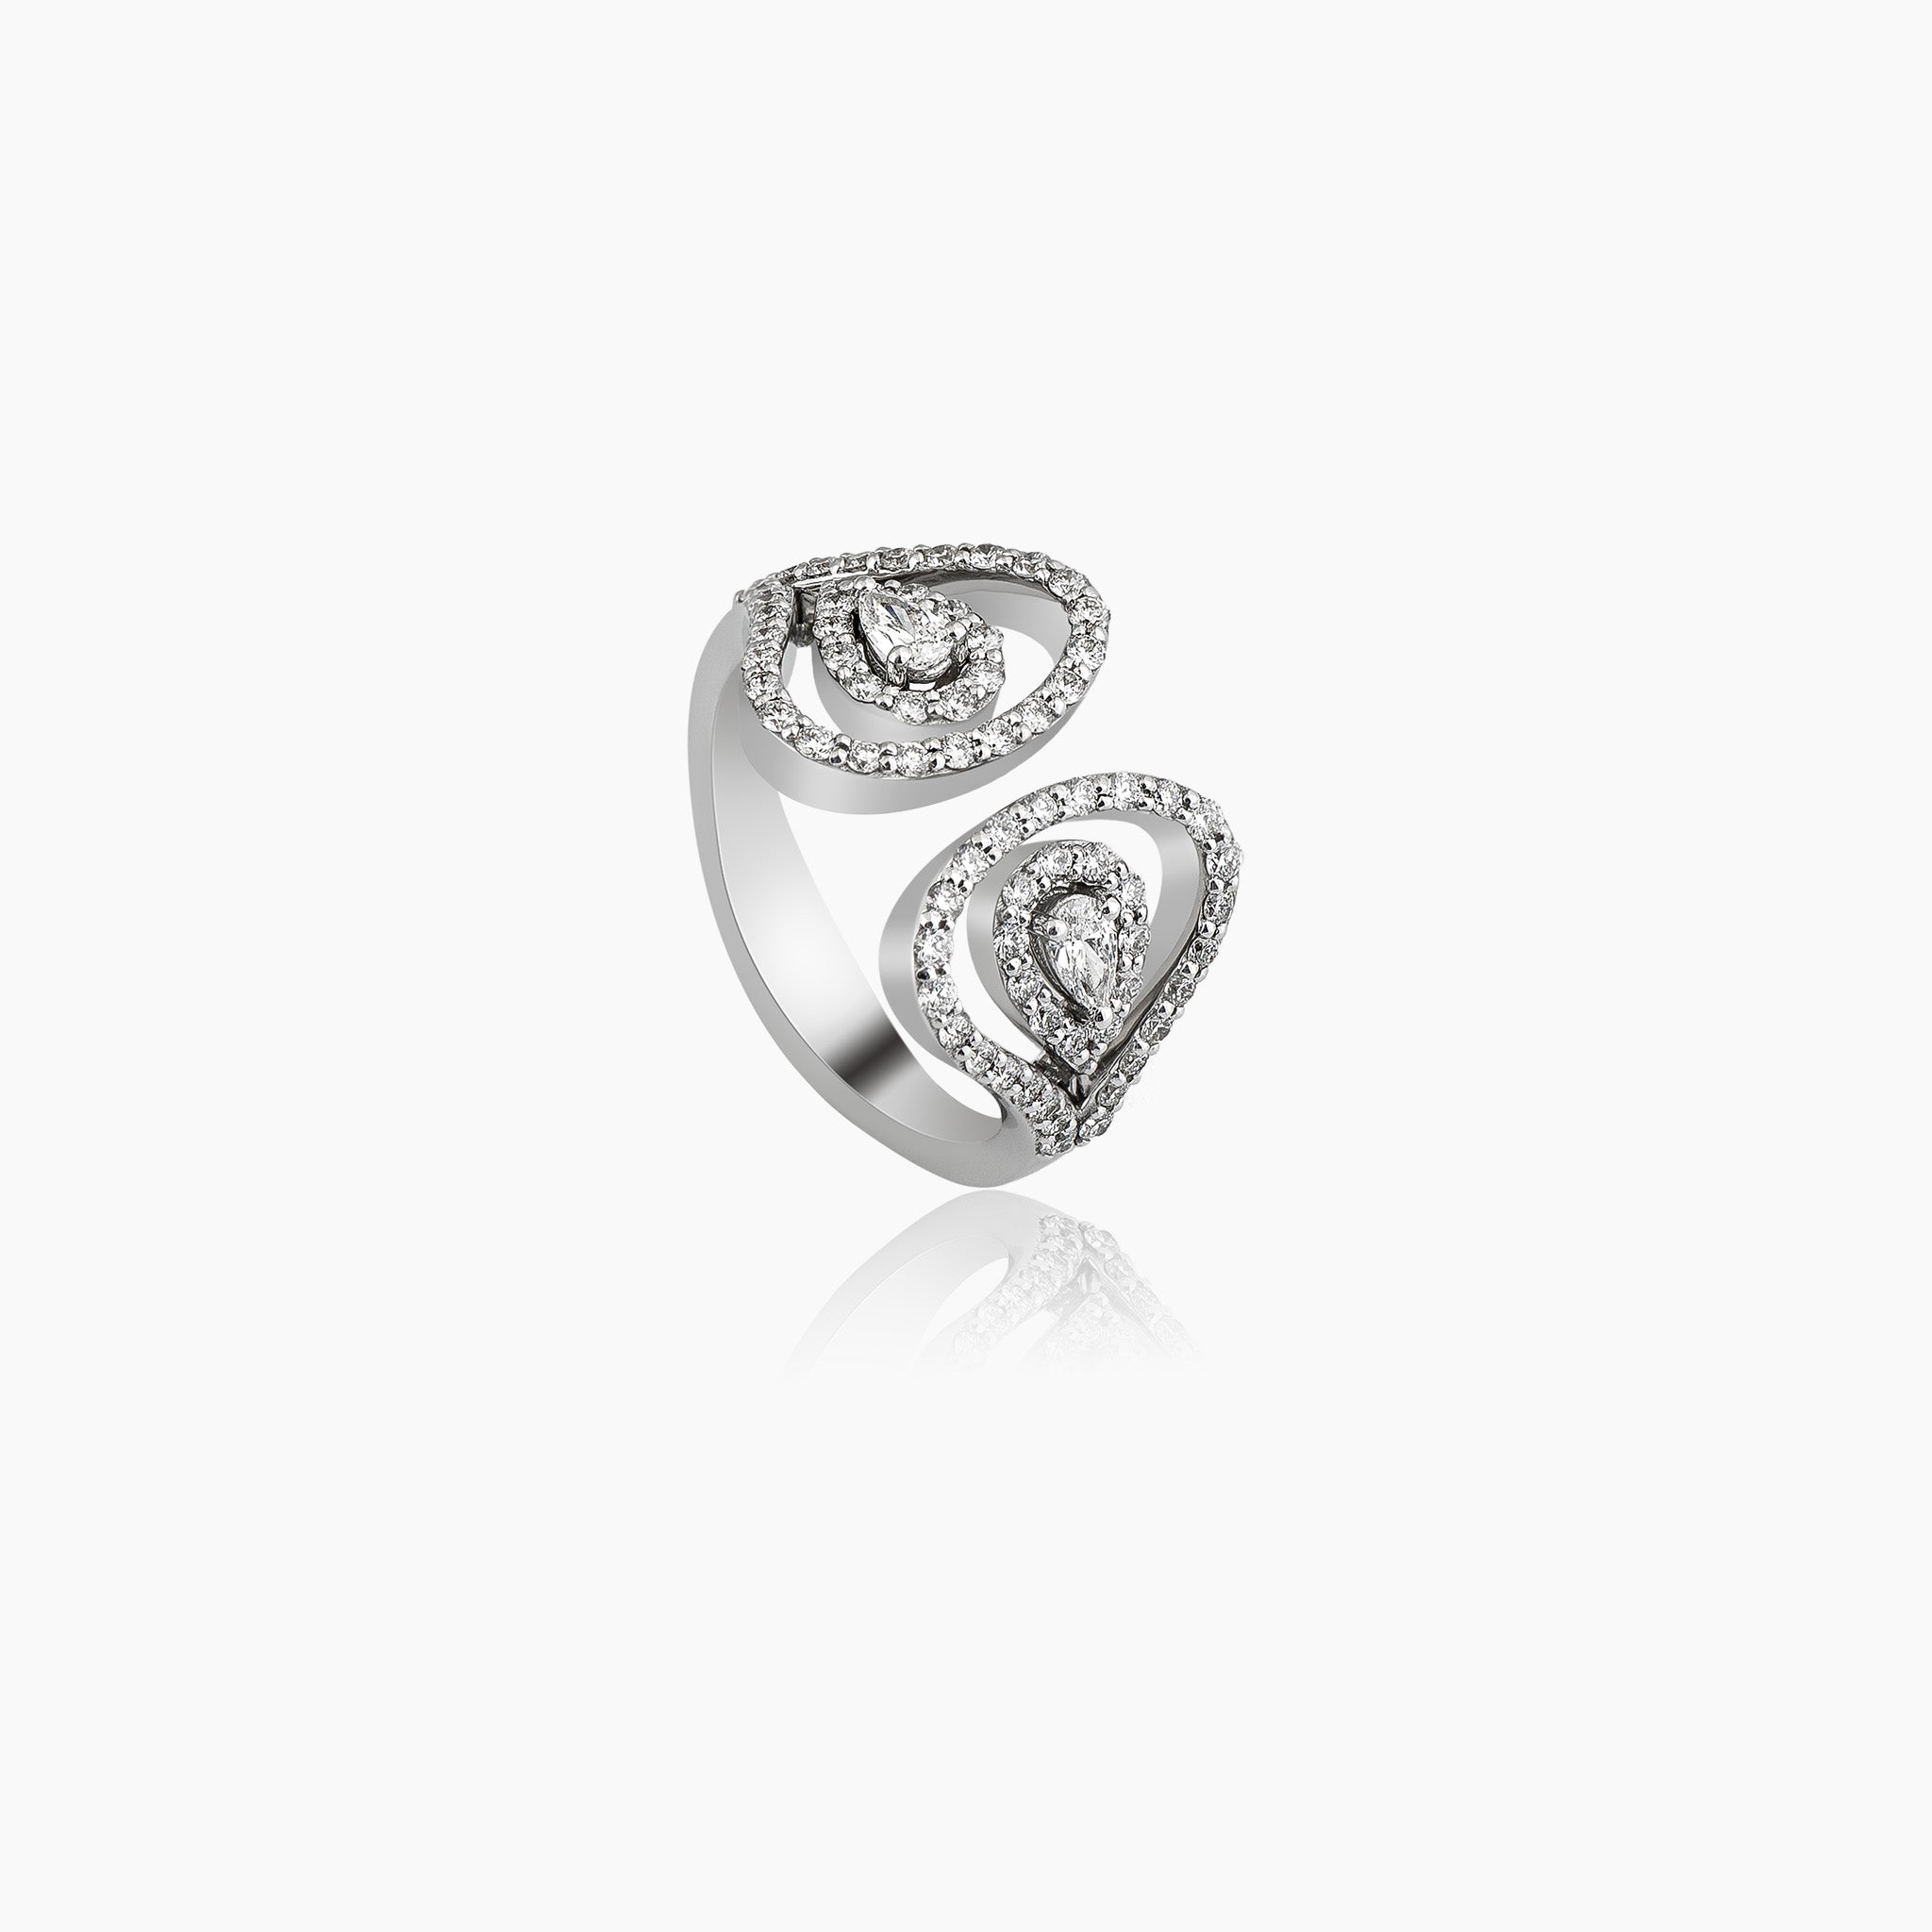 Double Venus Ring: Crafted in white gold with dazzling diamonds, presented against an off-white background.